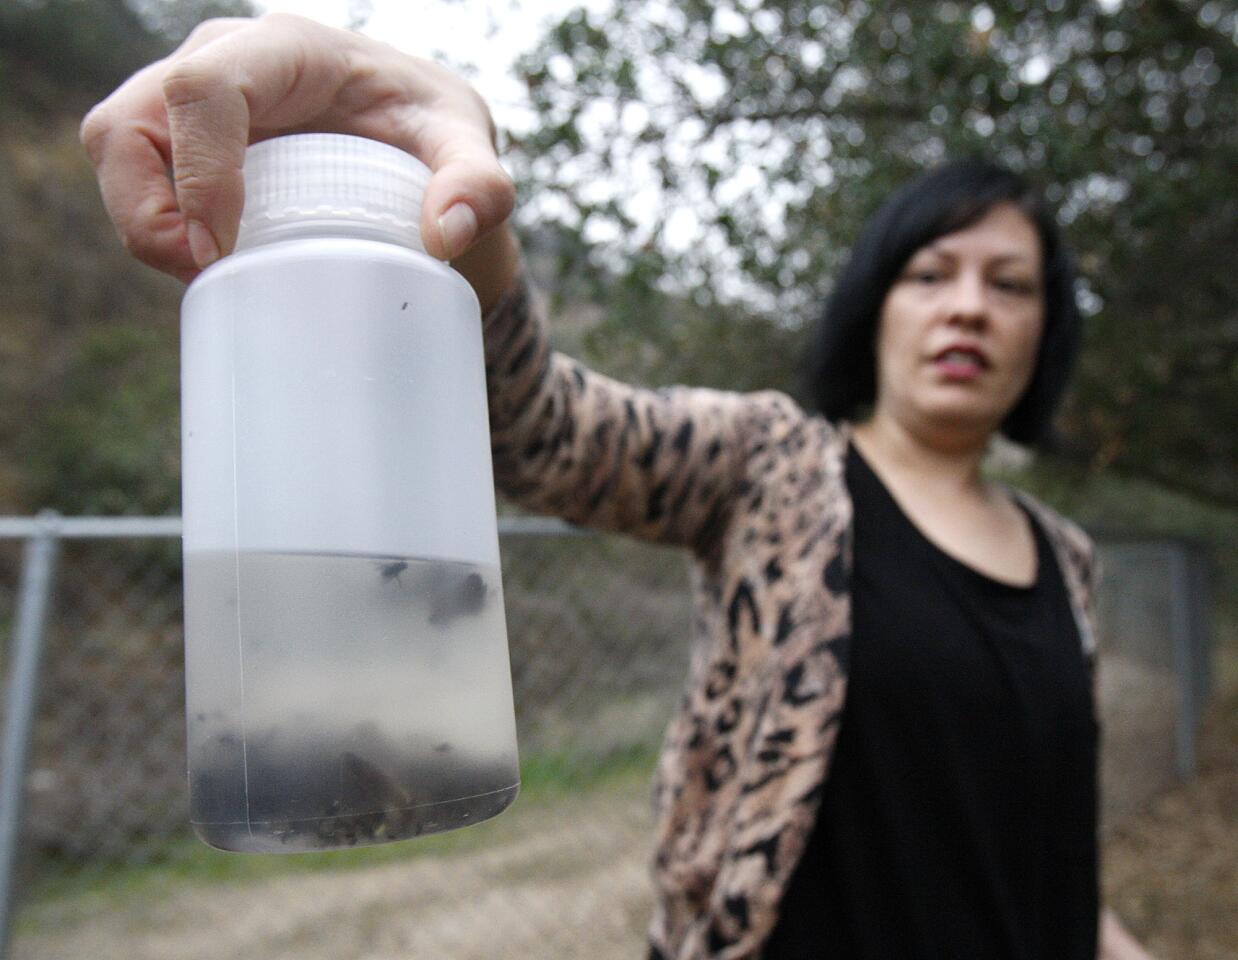 Assistant Collections Manager Lisa Gonzalez of the Entomology Department for the Natural History Museum Bioscan Project holds a bottle with insects that were collected at a home in Glendale in an insect collection station on Thursday, January 30, 2014. There are 30 other sites set up in the Los Angeles area to study insects in the urban environment, a study that is original. (Tim Berger/Staff Photographer)